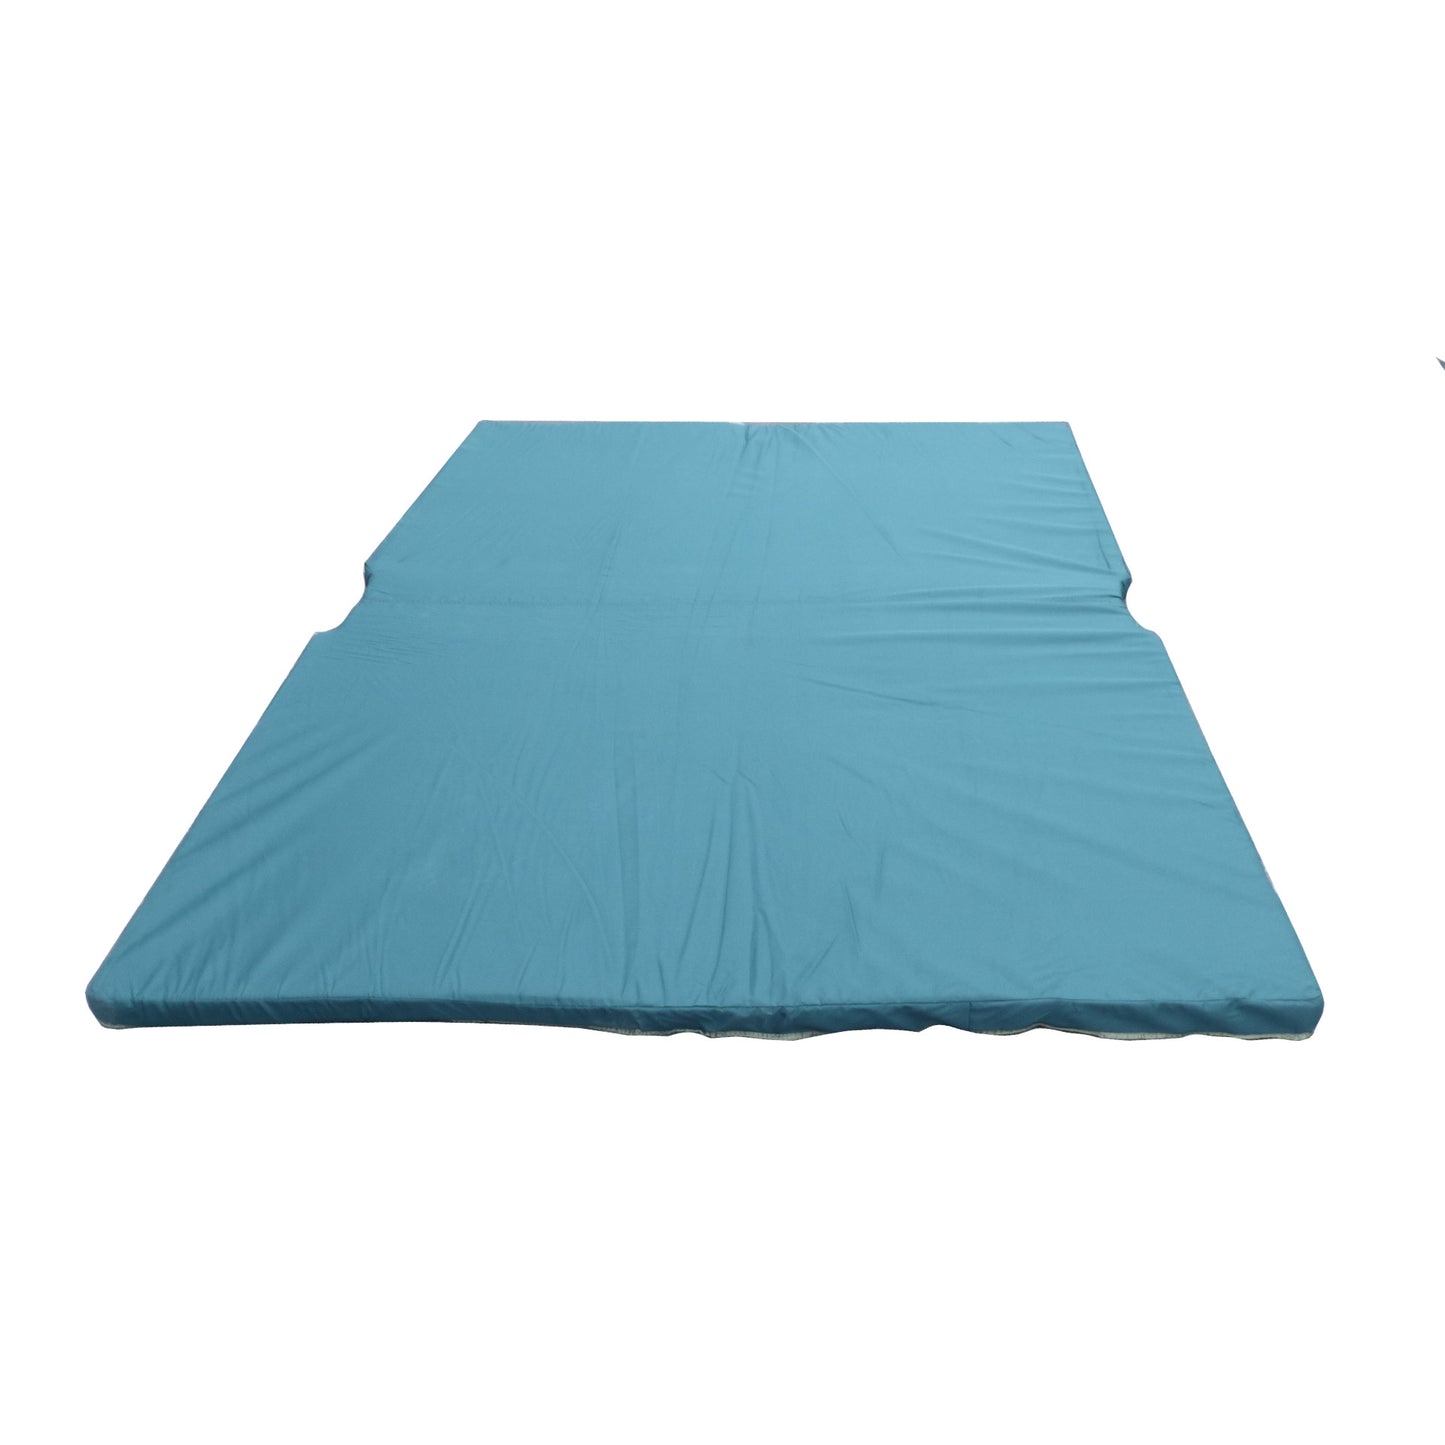 Replacement Mattress for Expedition Foldout 3 Person Roof Top Camping Tents -  - sold by Direct4x4